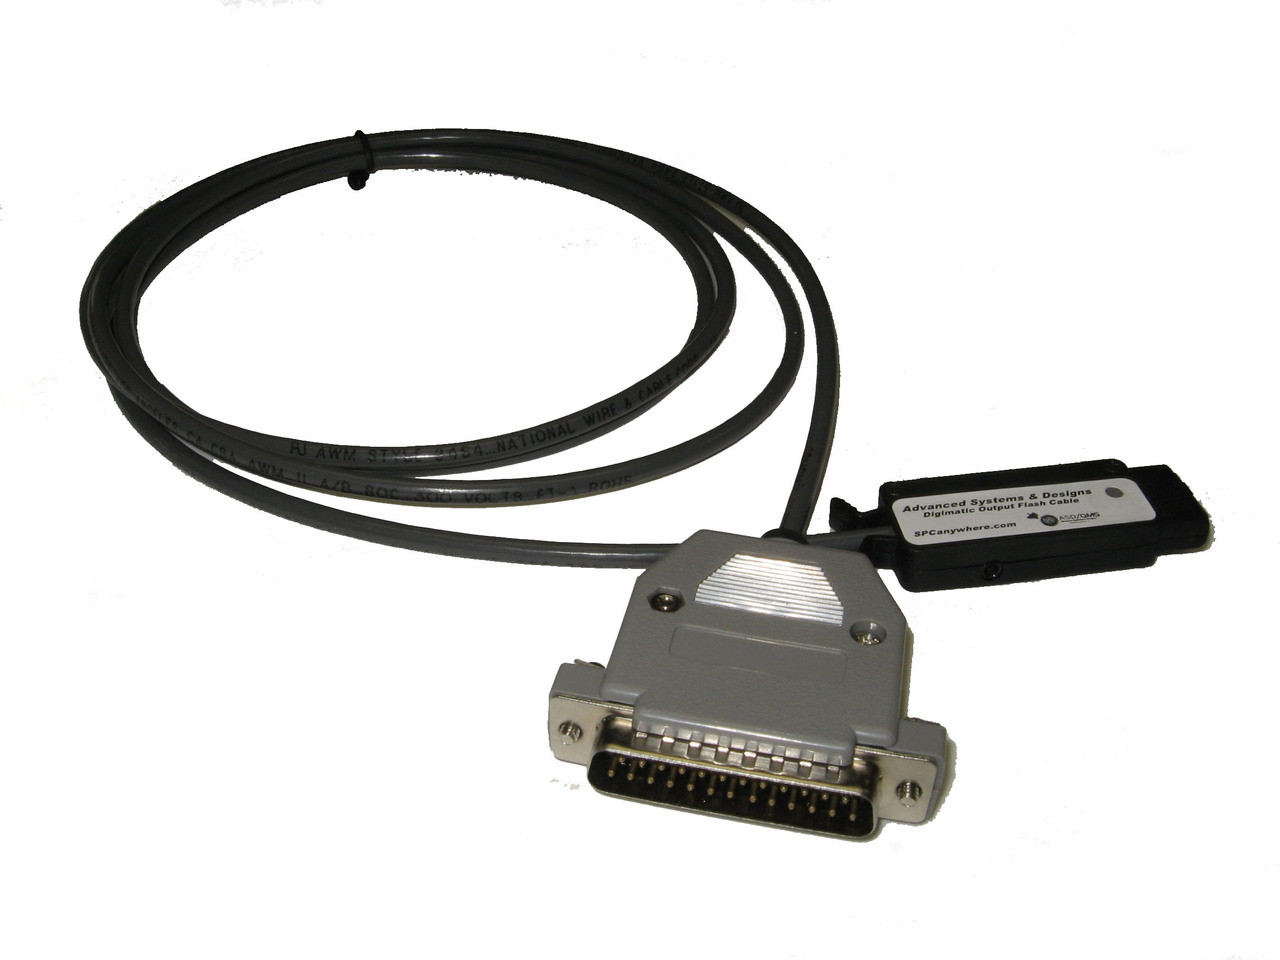 ASDQMS FlashCable® with Digimatic Output for A&D GF Series Precision Balance